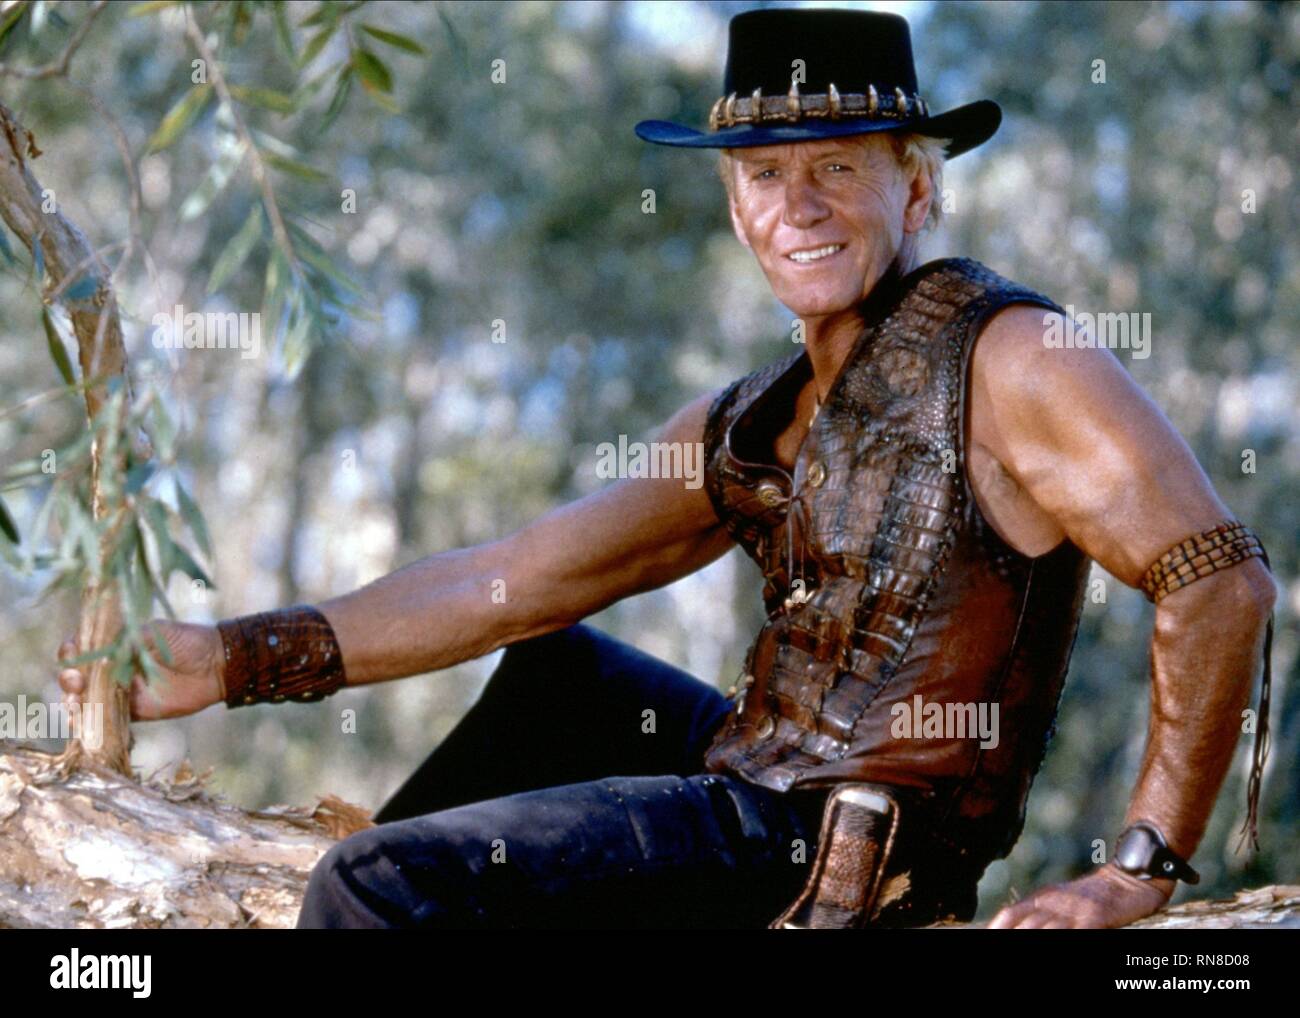 Paul Hogan Hat High Resolution Stock Photography and Images - Alamy